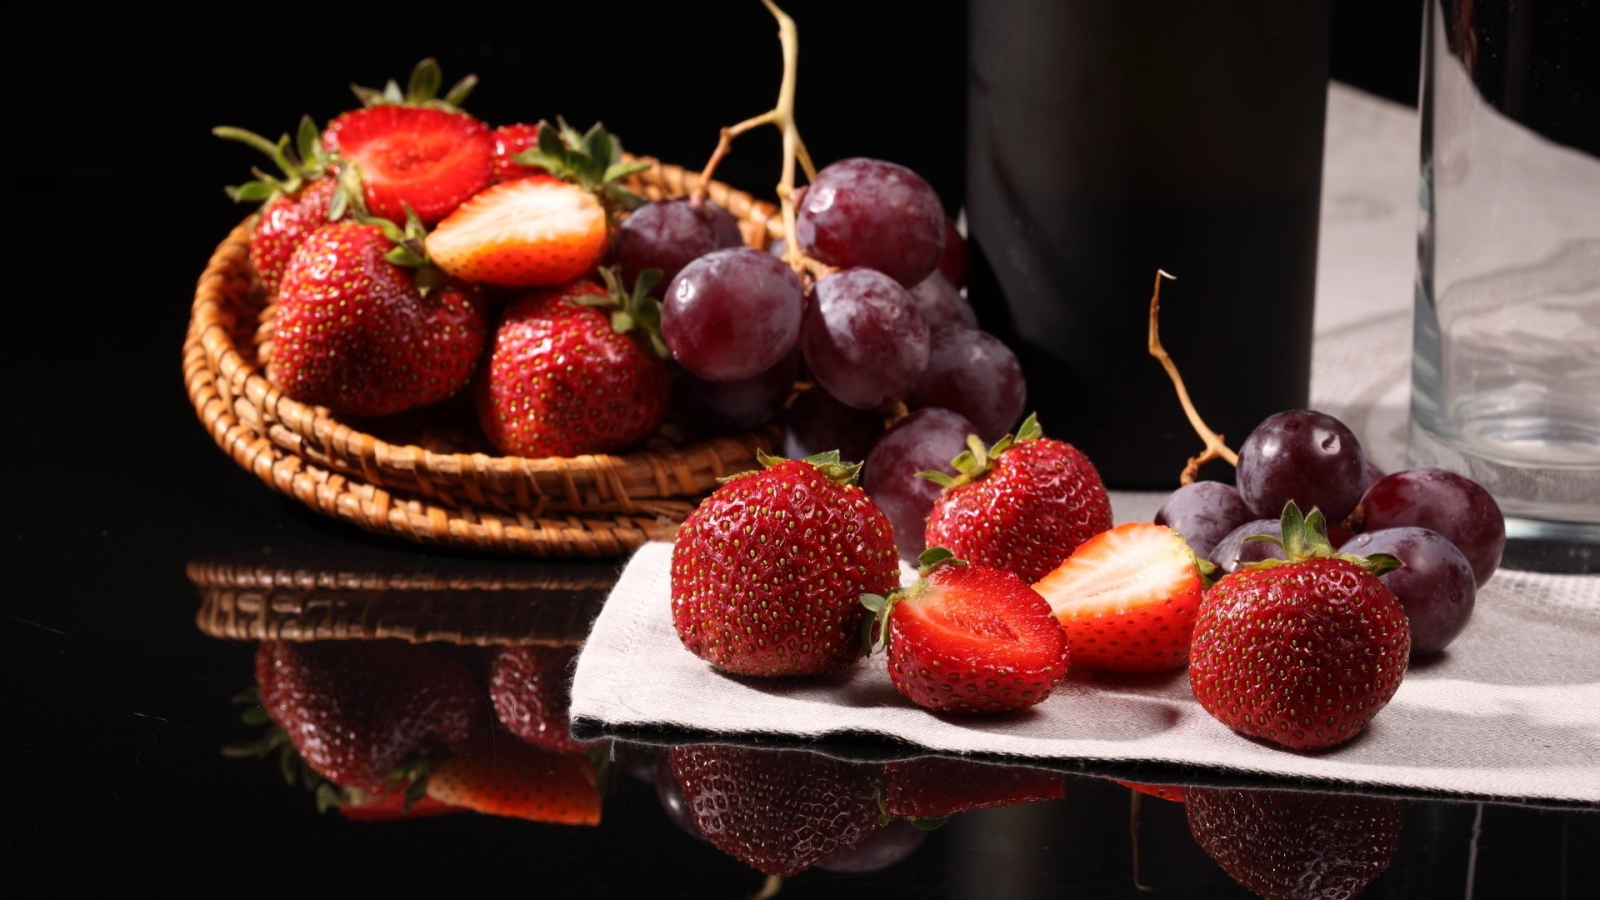 Strawberries and Grapes